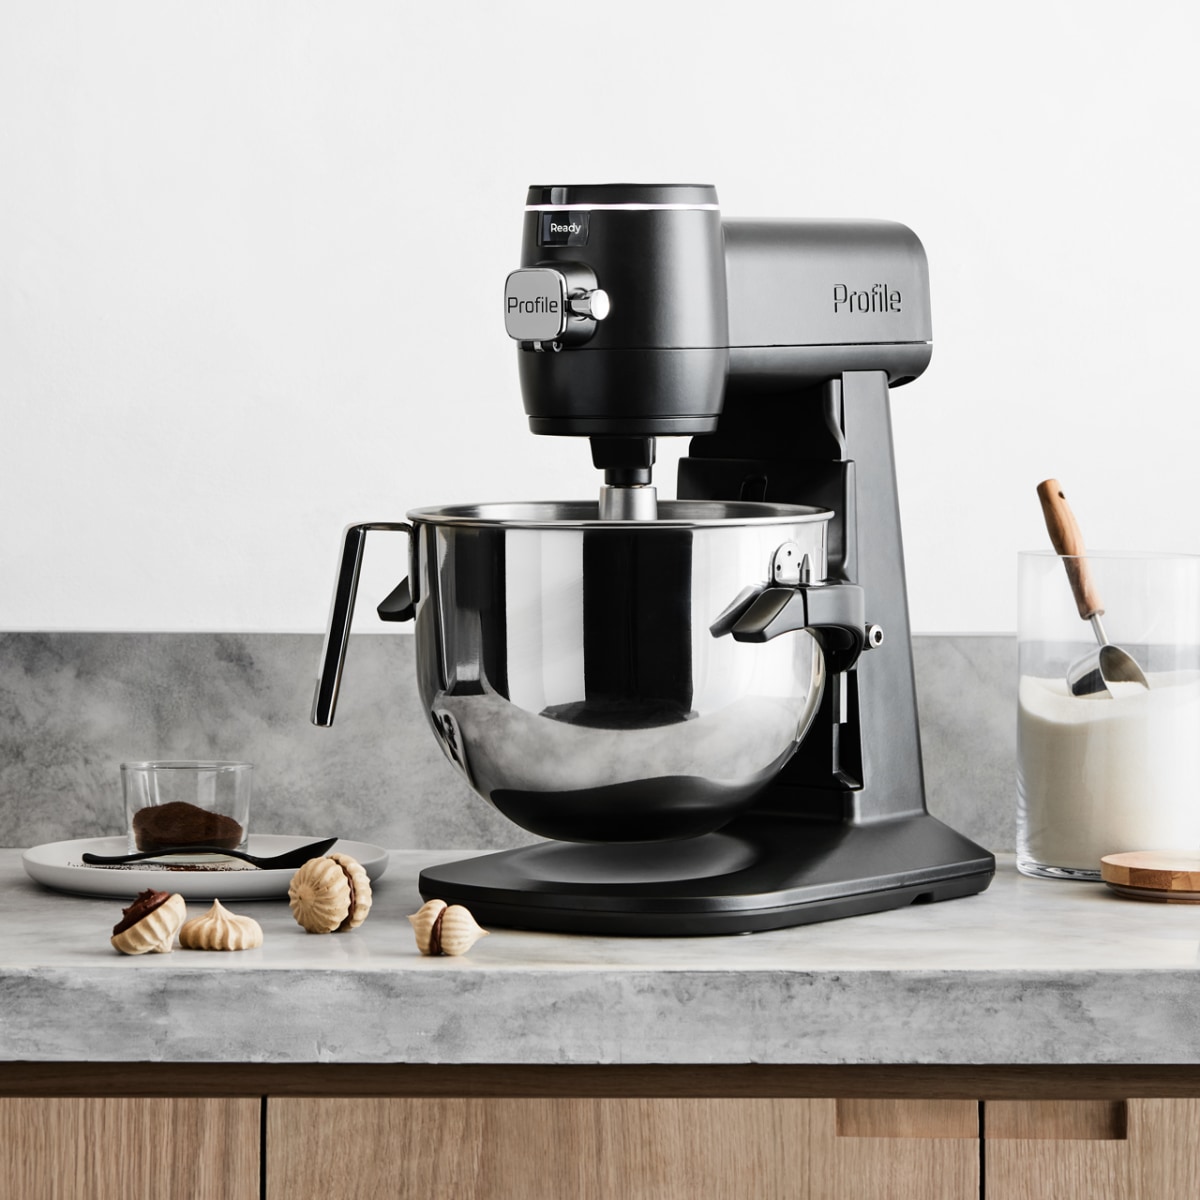 GE Appliances's new smart stand mixer will bake your cookies for you